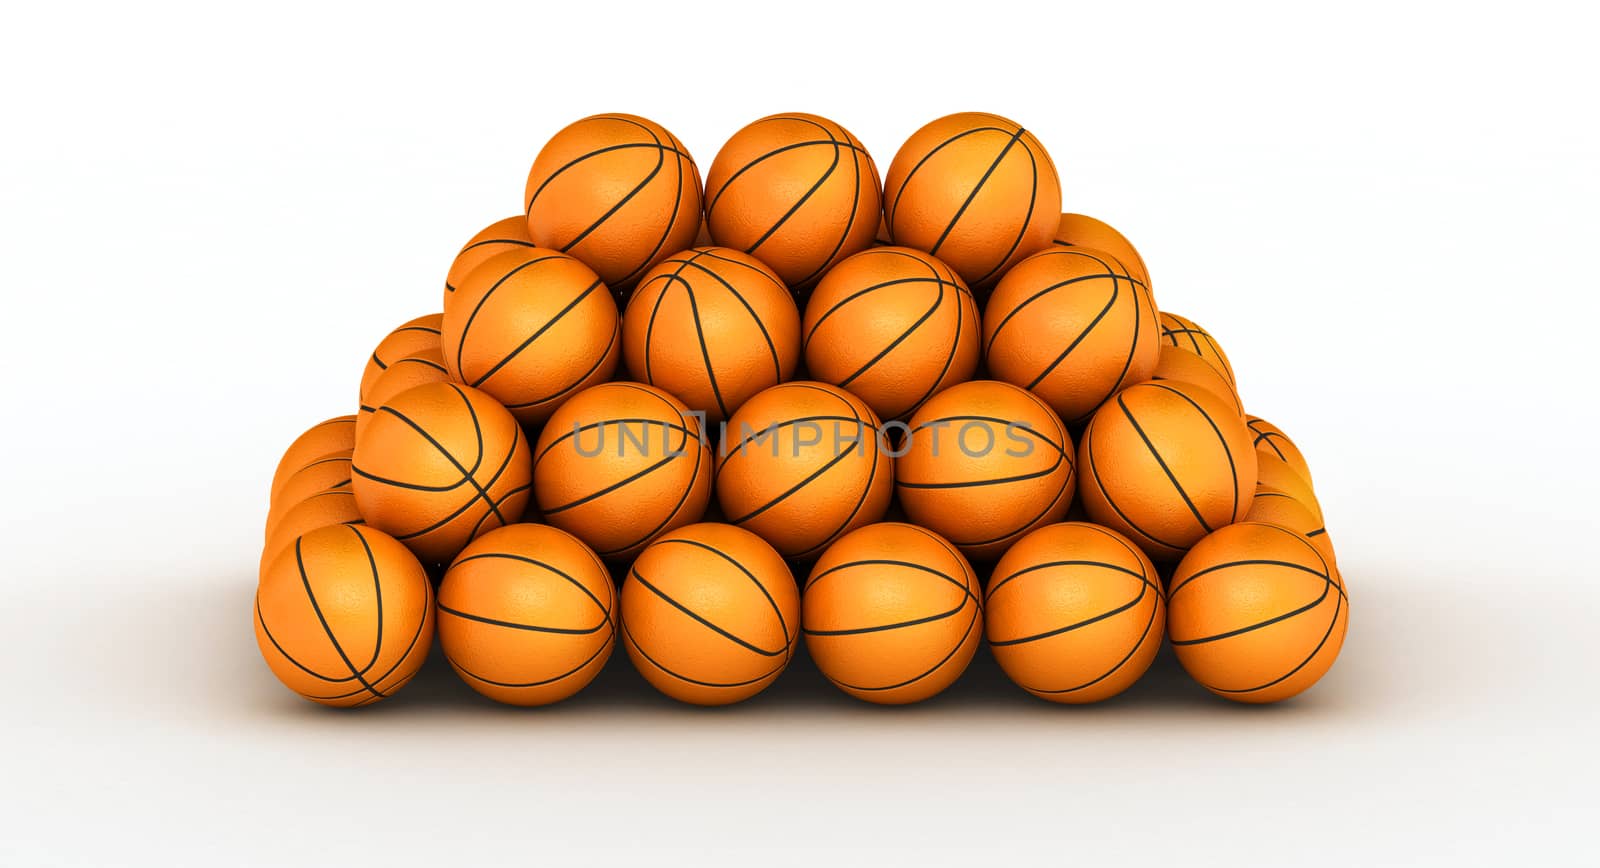 Stack of piled up basketball balls by iunewind